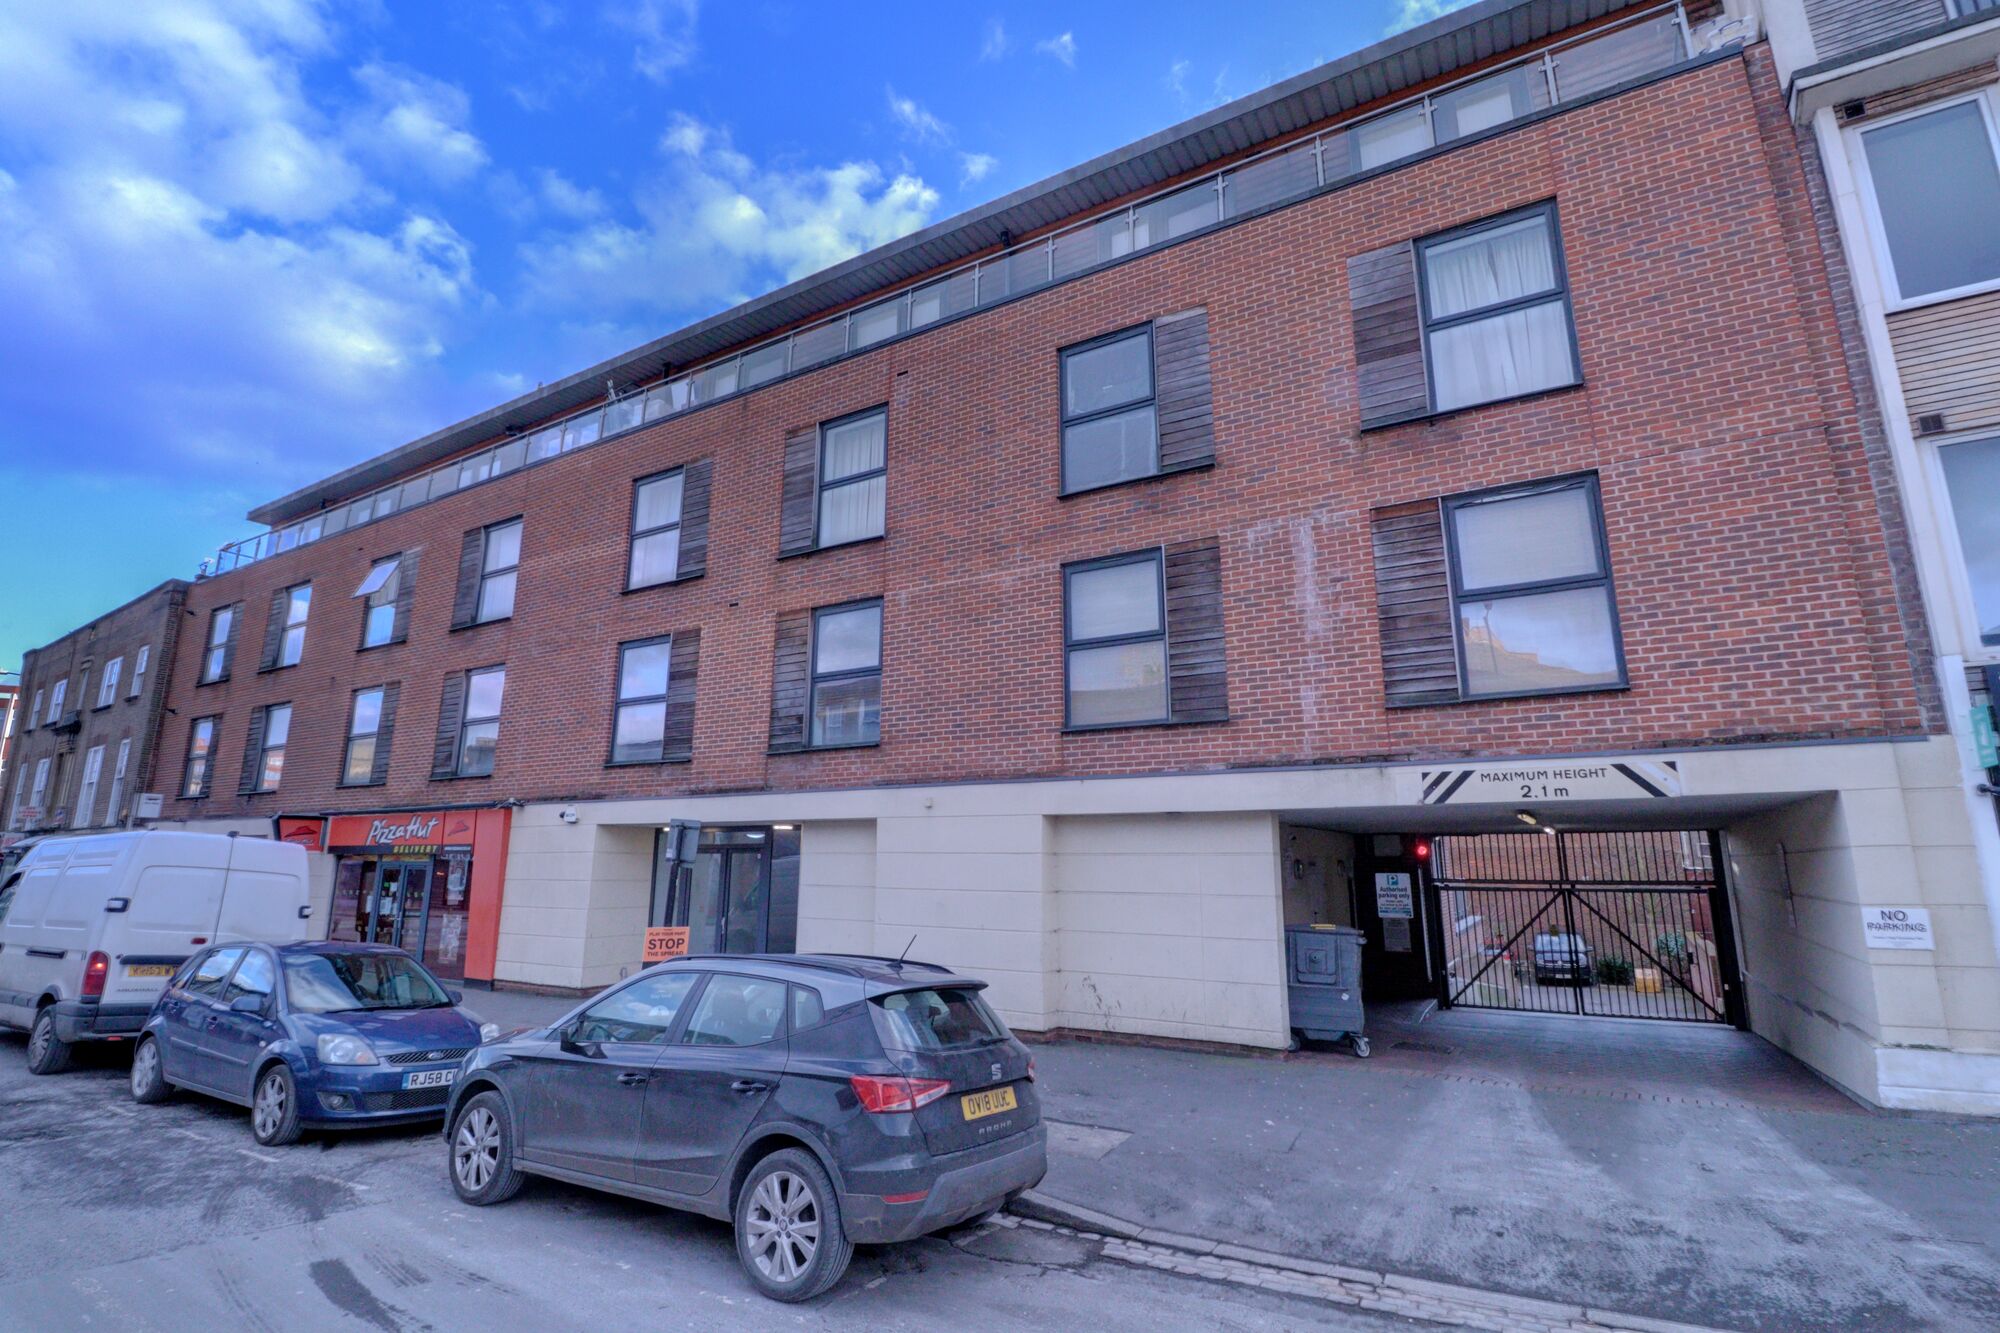 1 bedroom  flat to rent, Available now Castle Street, High Wycombe, HP13, main image